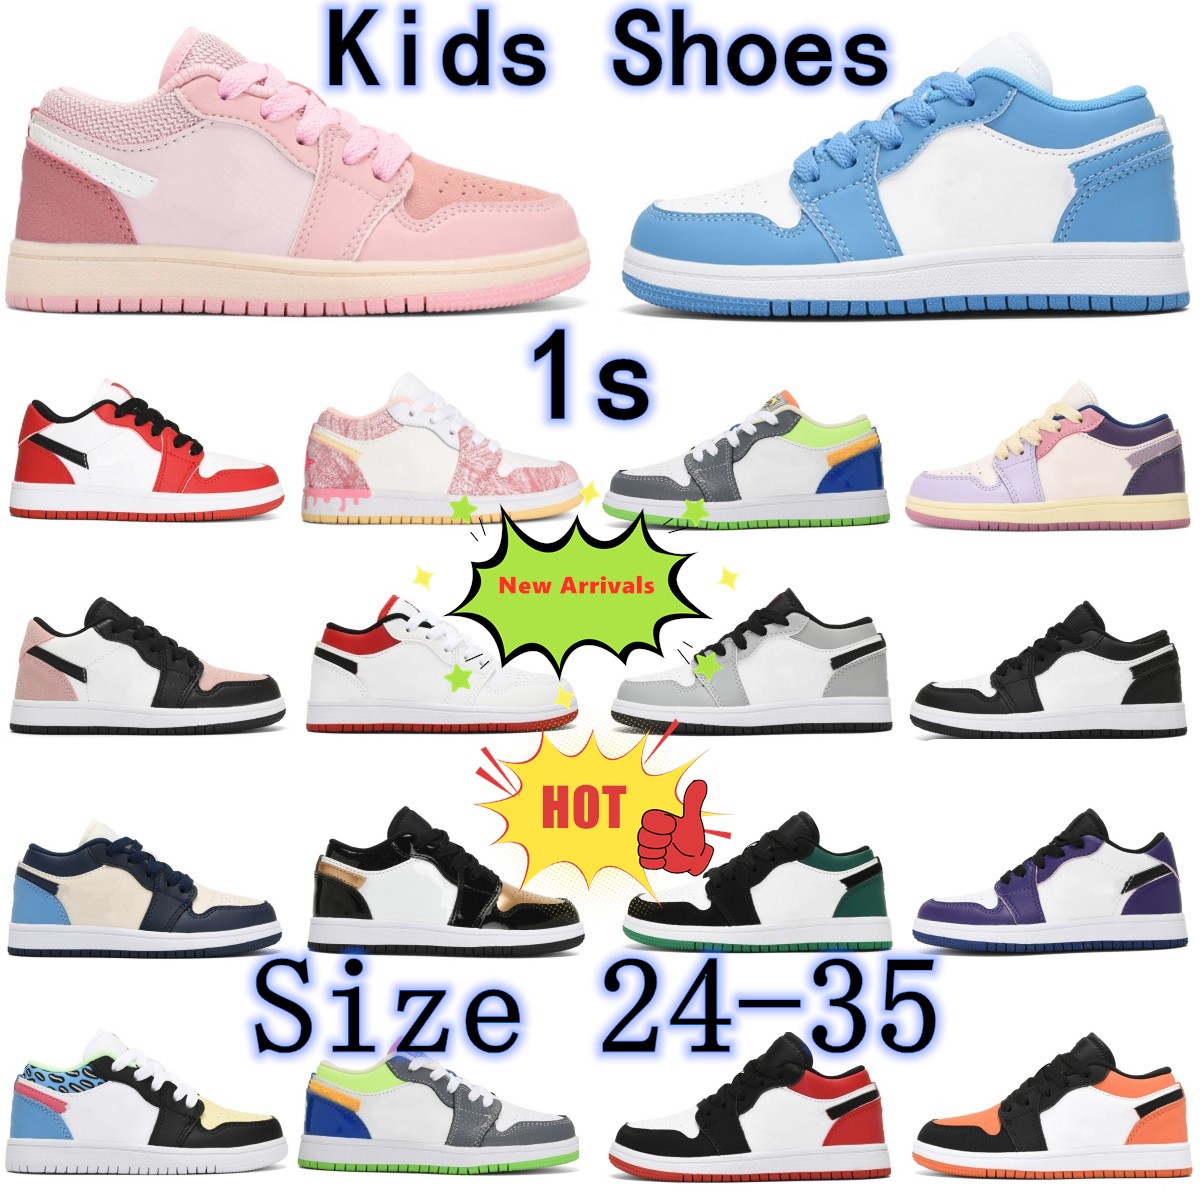 

Jumpman 1s toddlers Kids Shoes boys Basketball Infants Chicago Sneakers Children Royal Obsidian Kid Toddler Mid Baby Outdoor Shoe